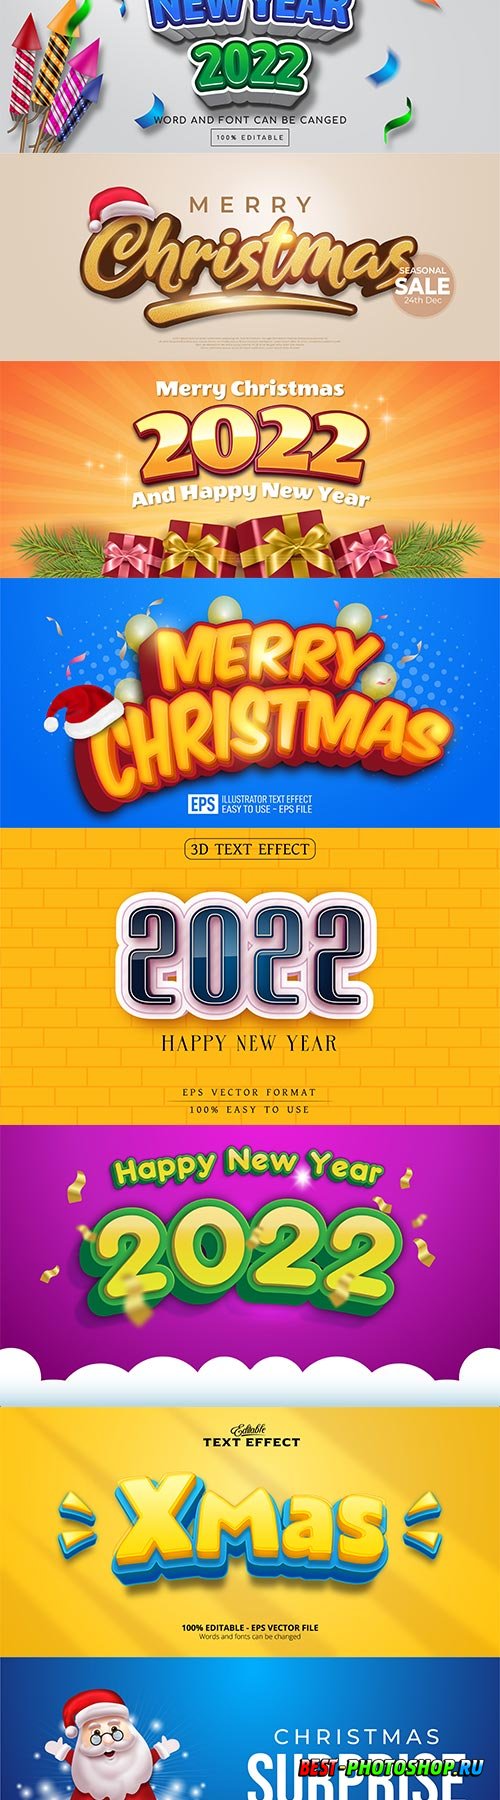 2022 New year and christmas editable text effect vector vol 28